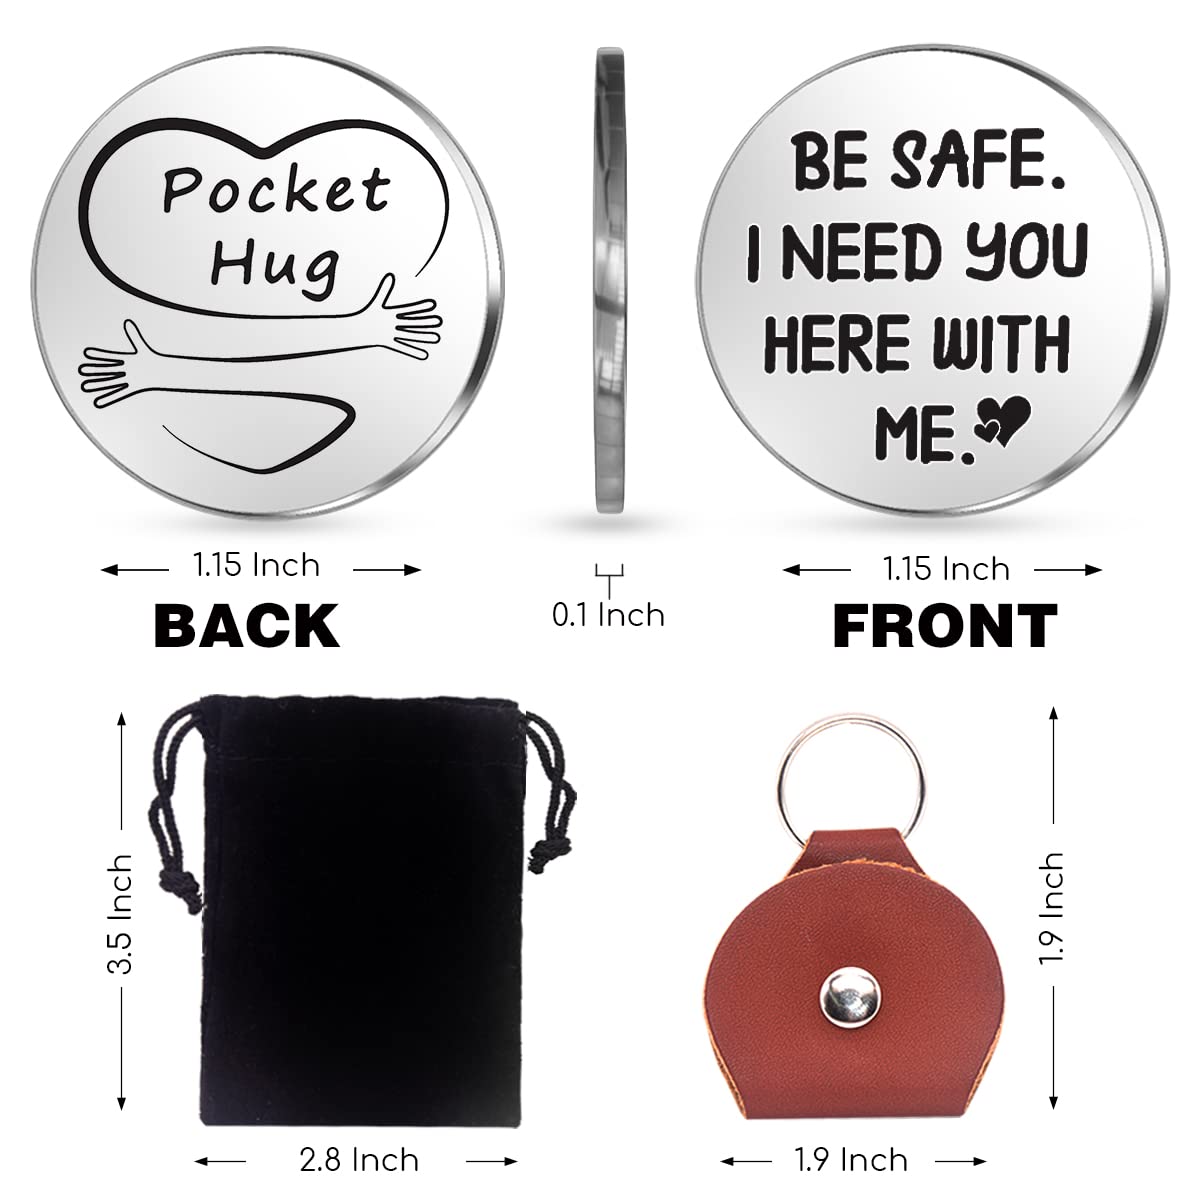 z-crange Be Safe I Need You Here With Me Pocket Hug Token Gift, Long Distance Relationship Keepsake Stainless Steel Double Sided, Valentines day Pocket Hug Token Gift for Boyfriend Husband Dad